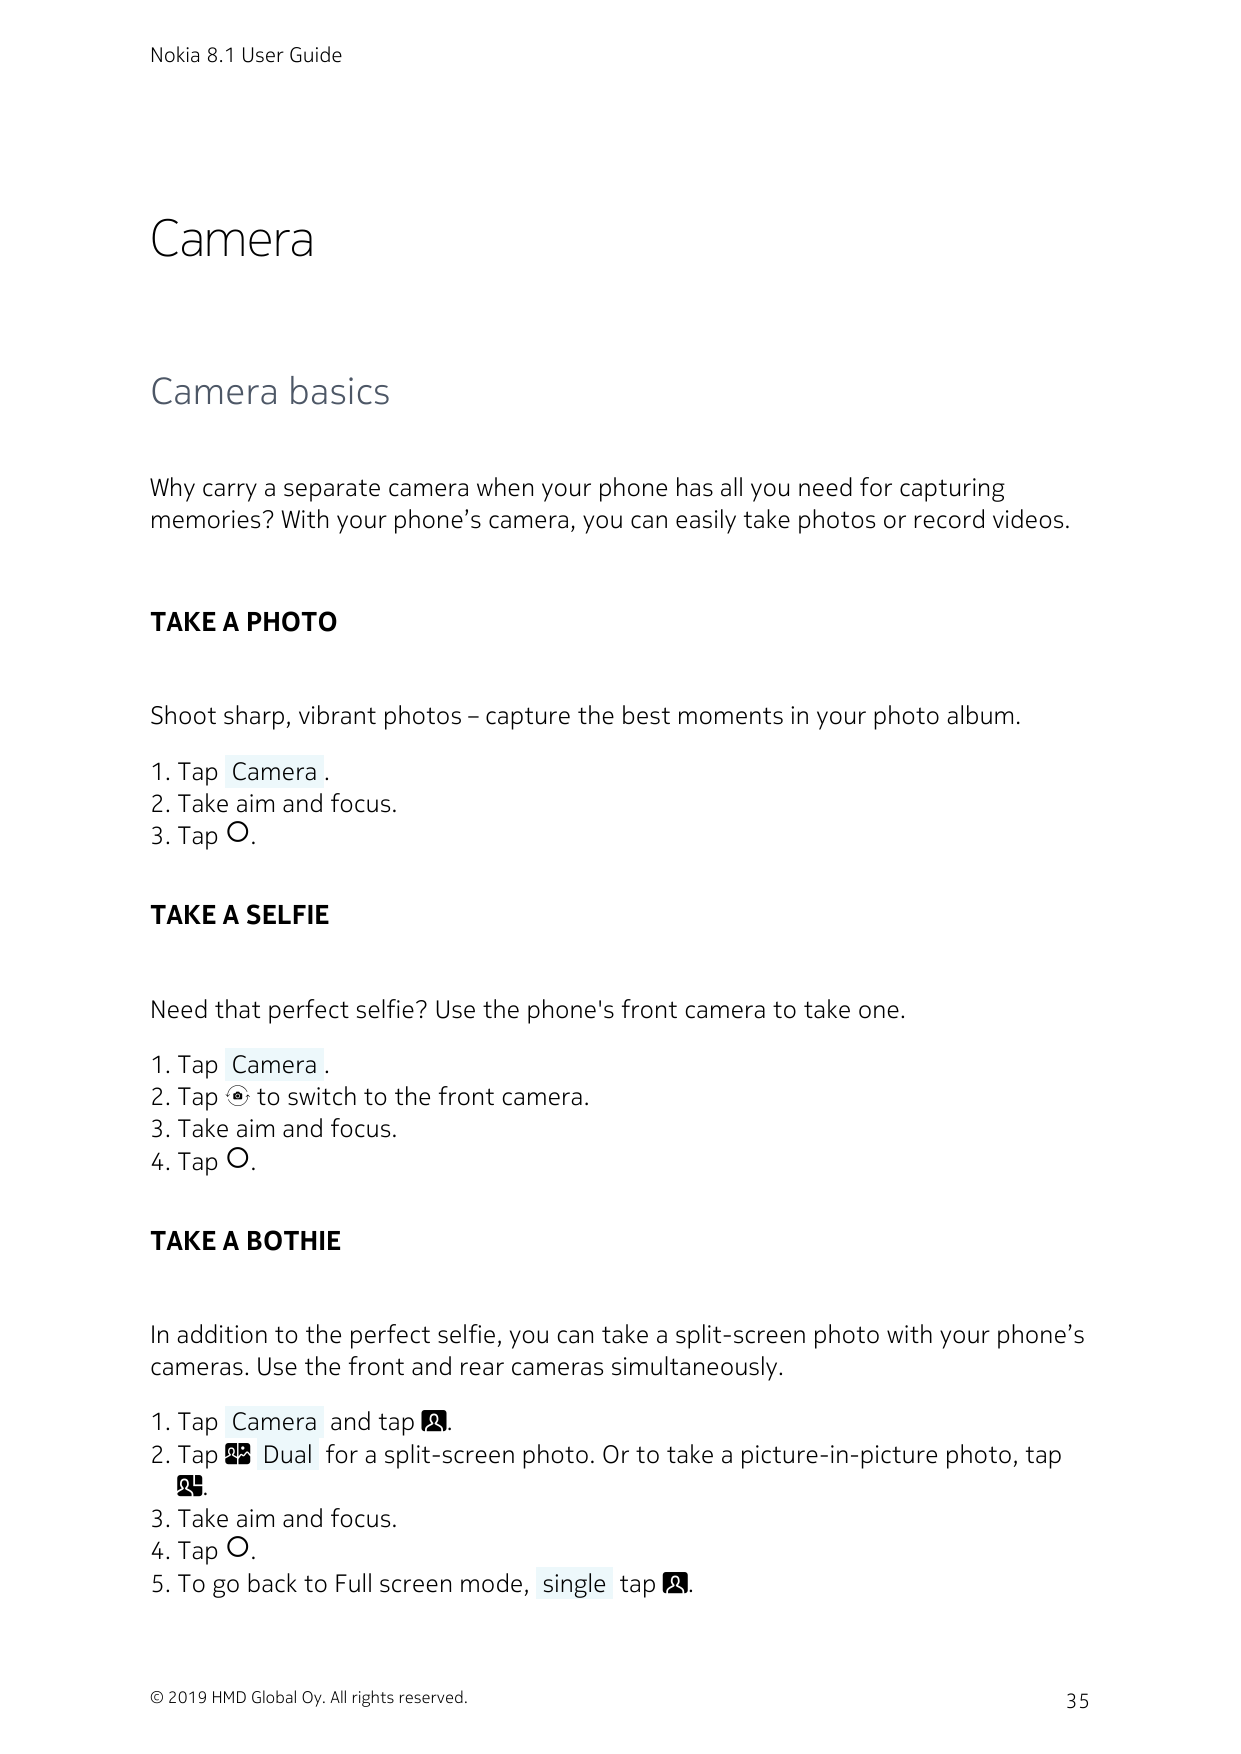 Nokia 8.1 User GuideCameraCamera basicsWhy carry a separate camera when your phone has all you need for capturingmemories? With 